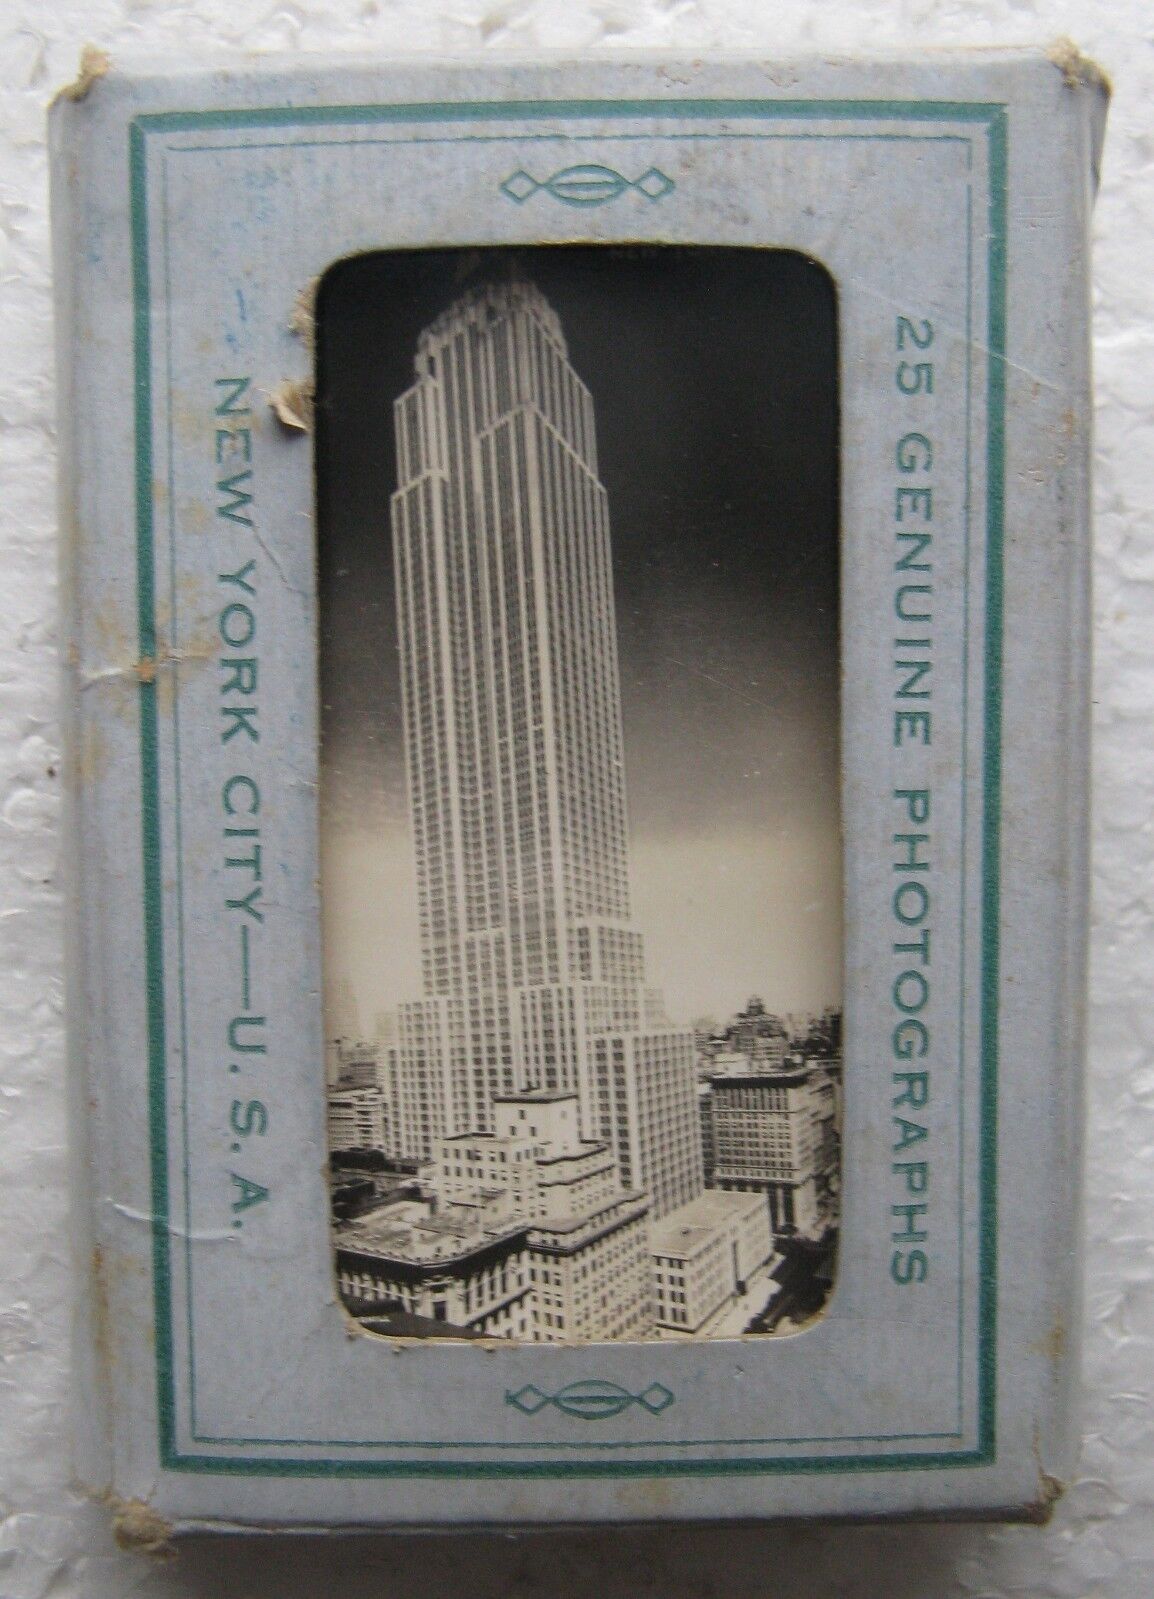 25 little photographs of New York City (in mailer) sent circa 1930's/1940's